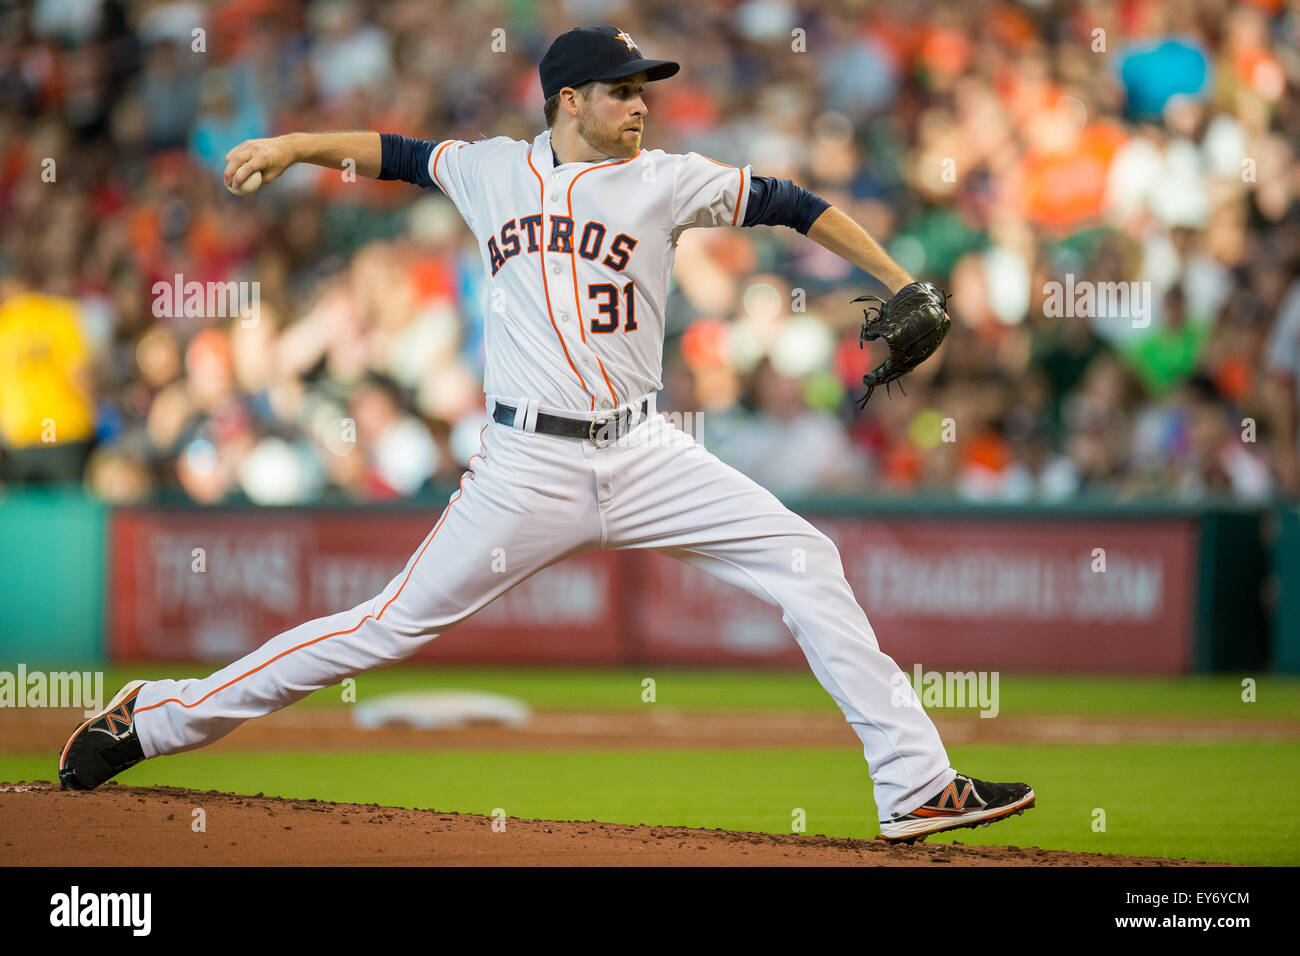 Houston, TX, USA. 22nd July, 2015. Houston Astros starting pitcher Collin McHugh (31) pitches during the 2nd inning of a Major League Baseball game between the Houston Astros and the Boston Red Sox at Minute Maid Park in Houston, TX. Trask Smith/CSM/Alamy Live News Stock Photo